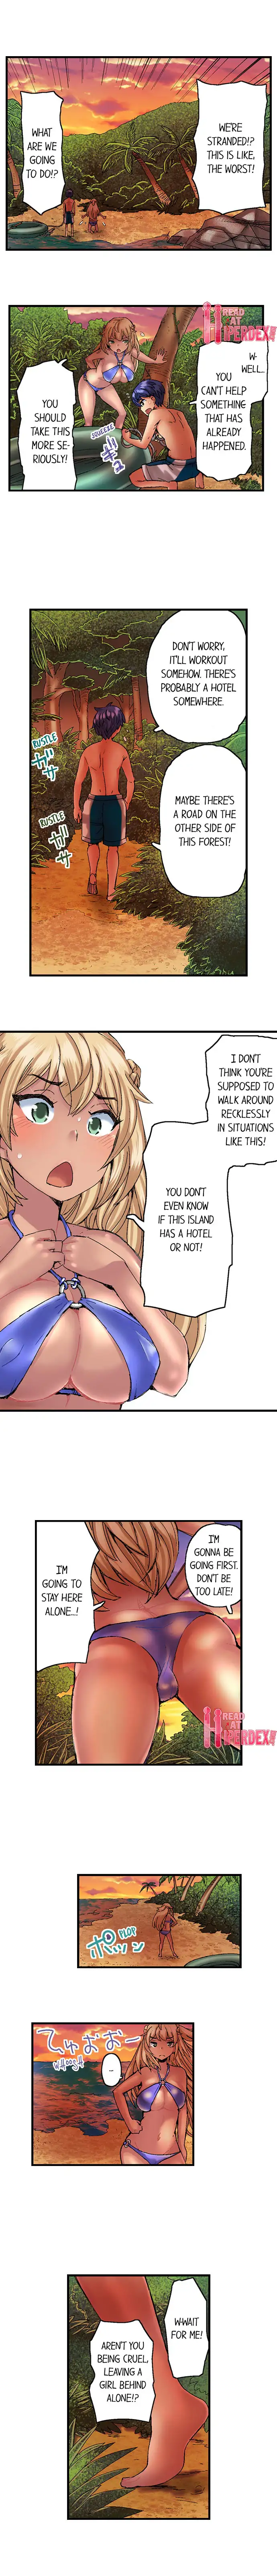 Taking a Hot Tanned Chick’s Virginity - Chapter 10 Page 2